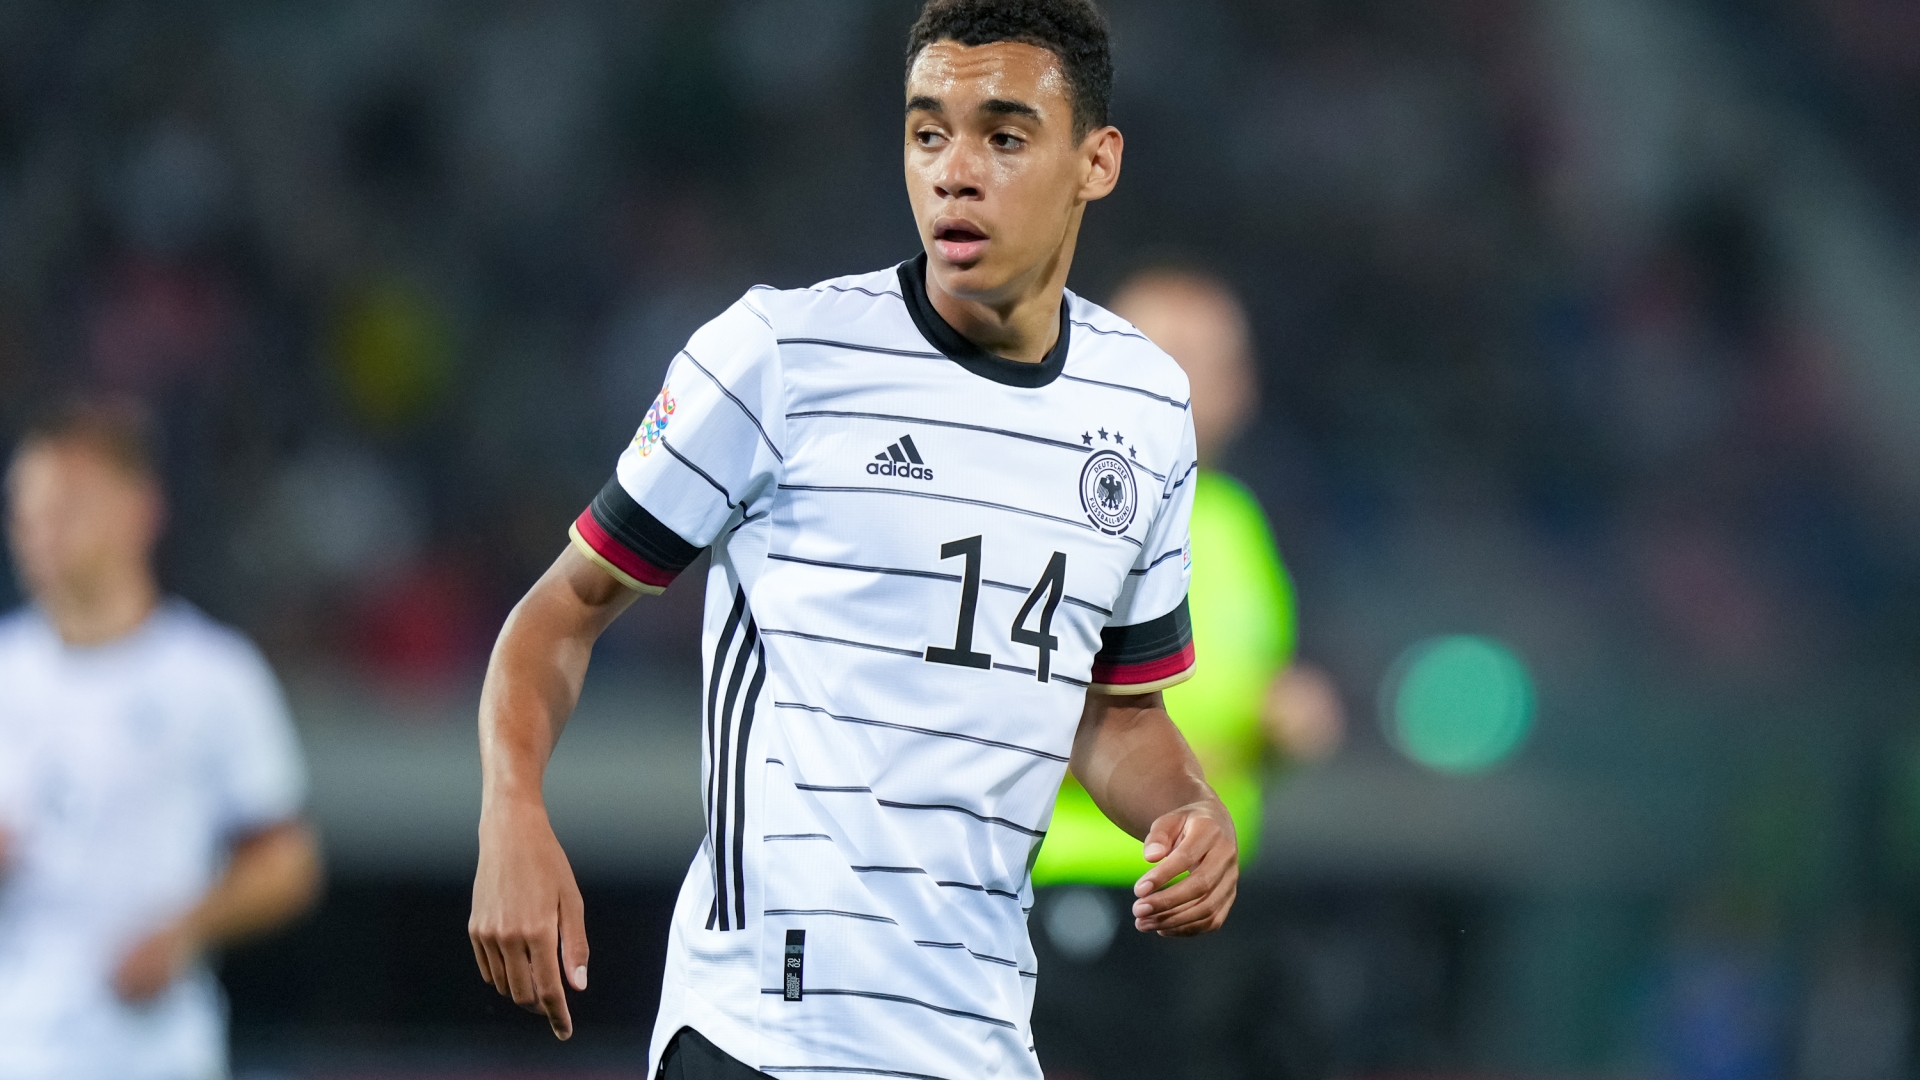 Jamal Musiala: Gareth Southgate admits he 'would have liked' to keep teenager who said 'England is home' but chose to represent Germany at international level